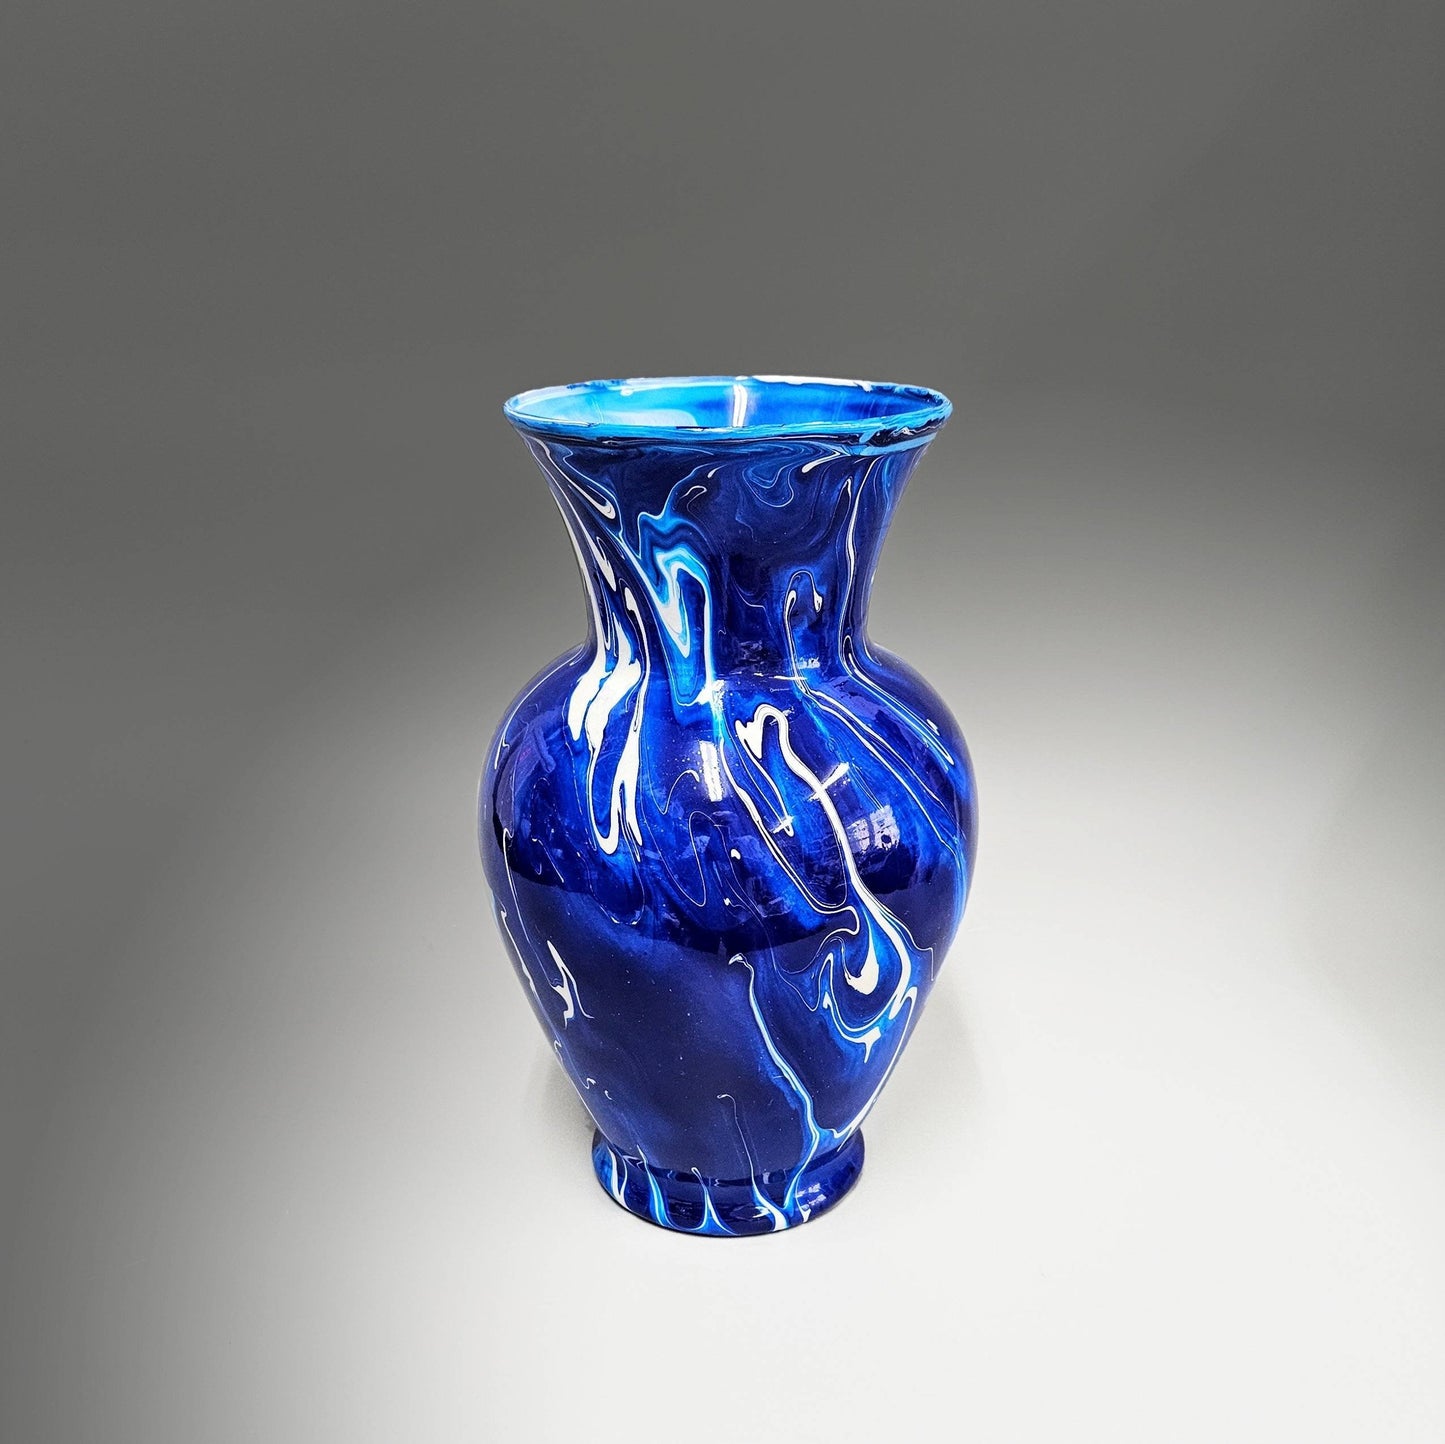 Electric Blue and White Glass Art Vase